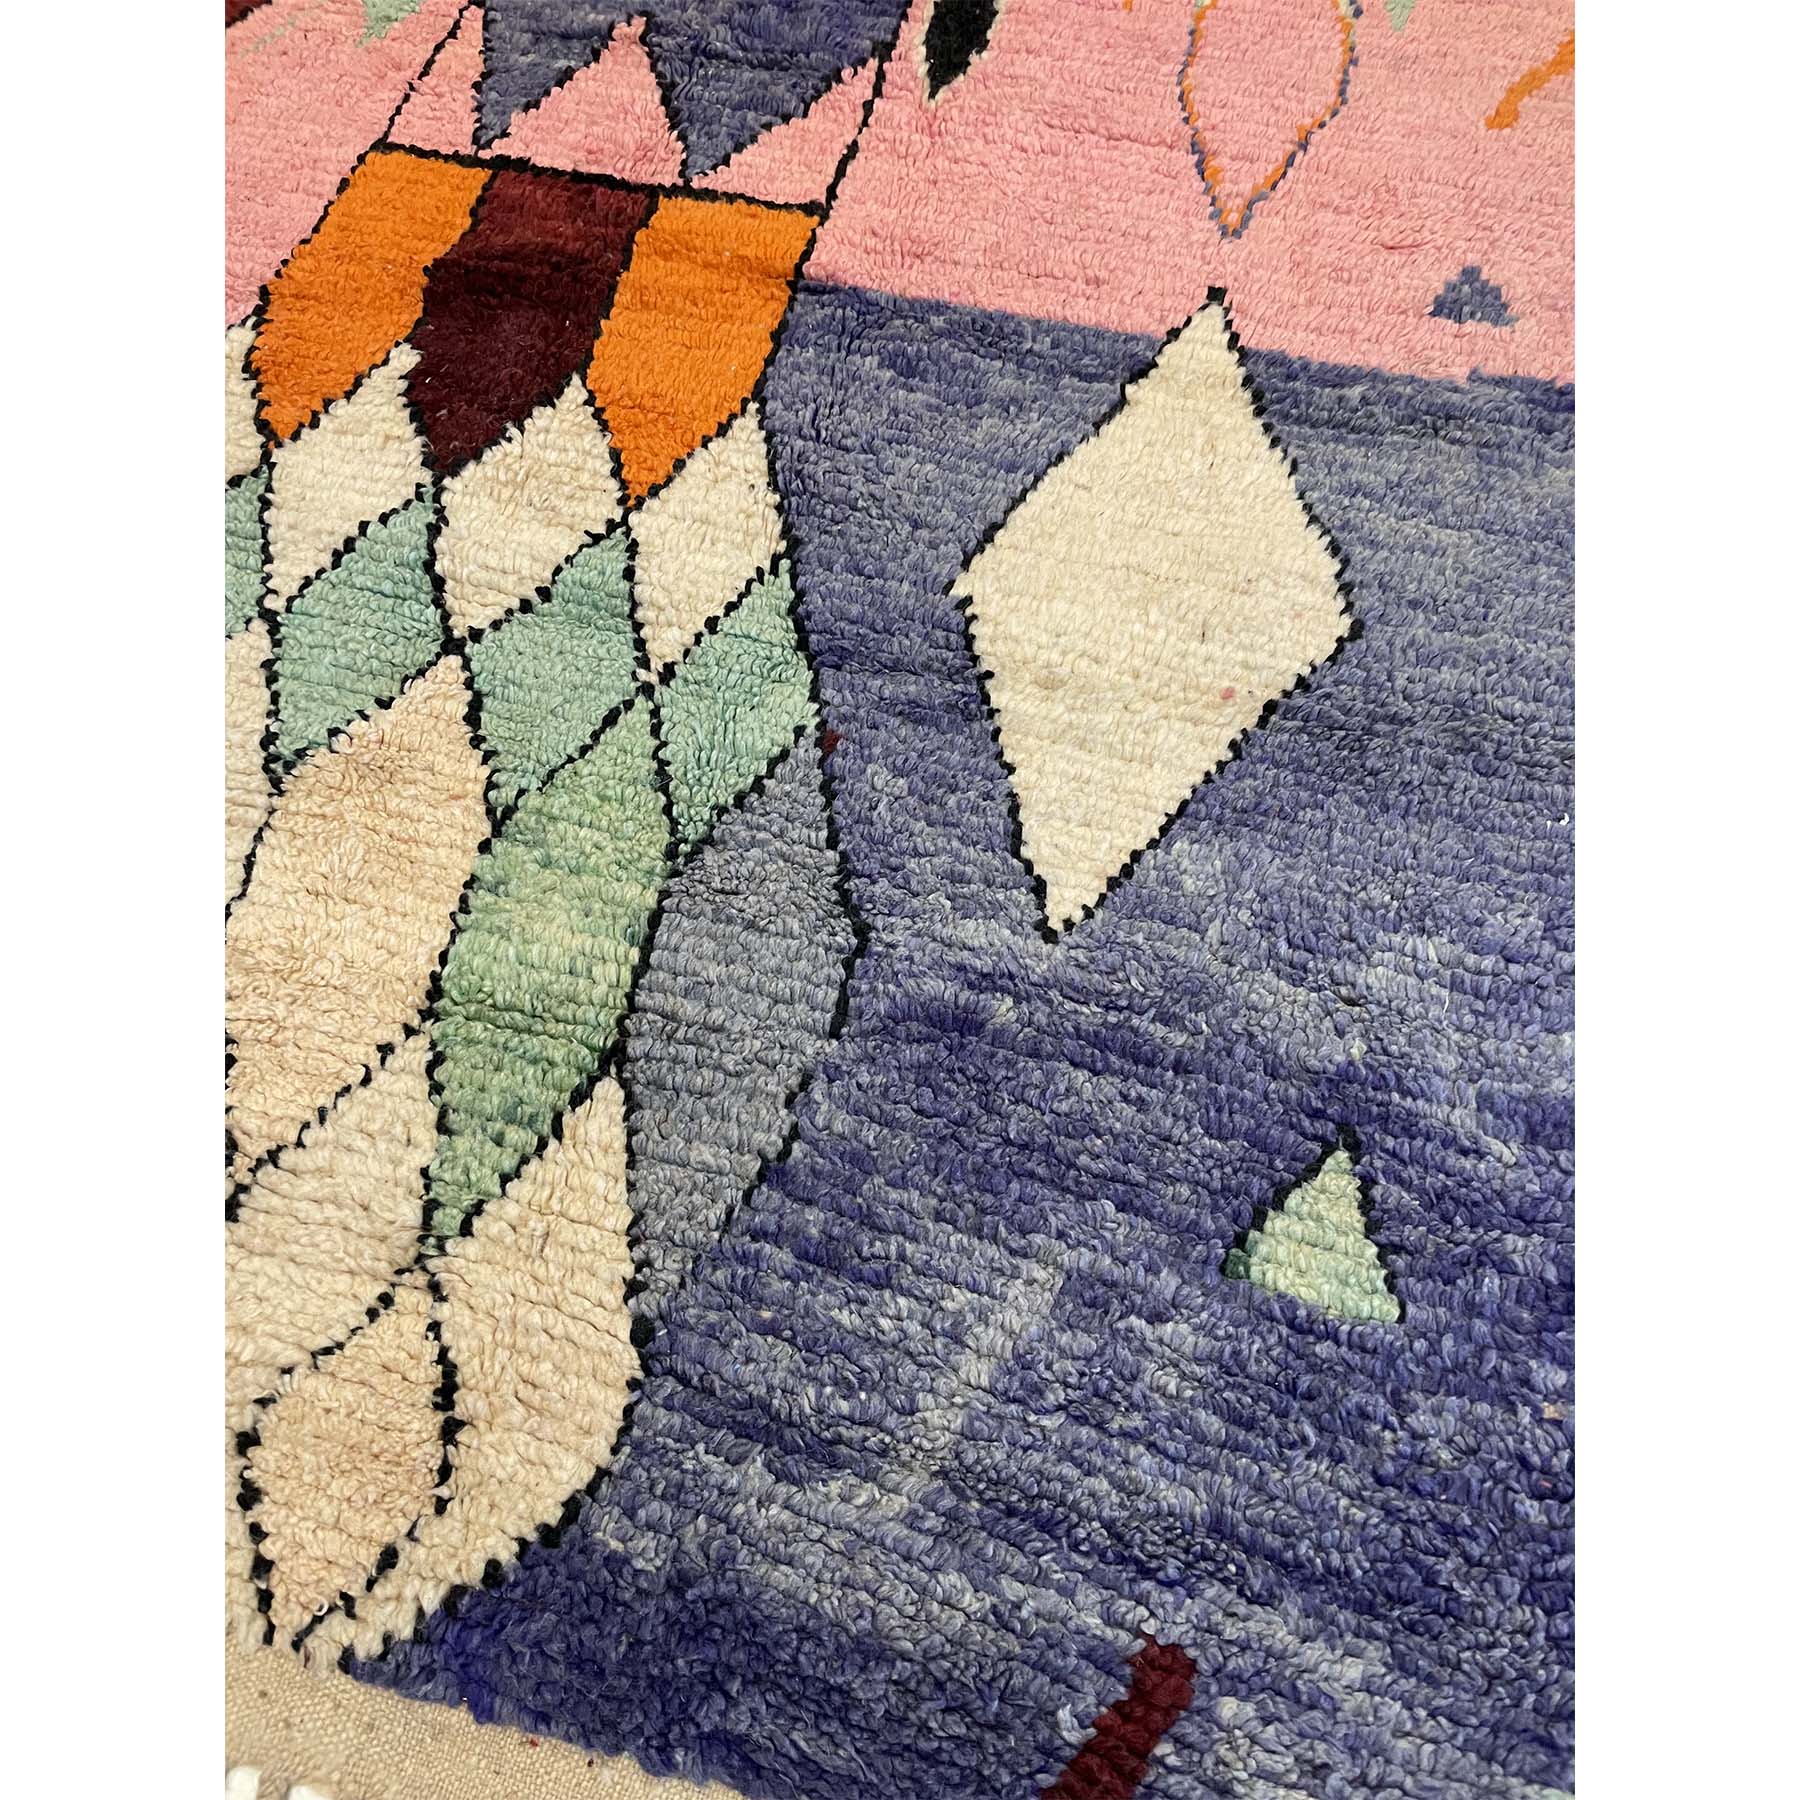 Handwoven colorful Moroccan area rug in pink and periwinkle - Kantara | Moroccan Rugs